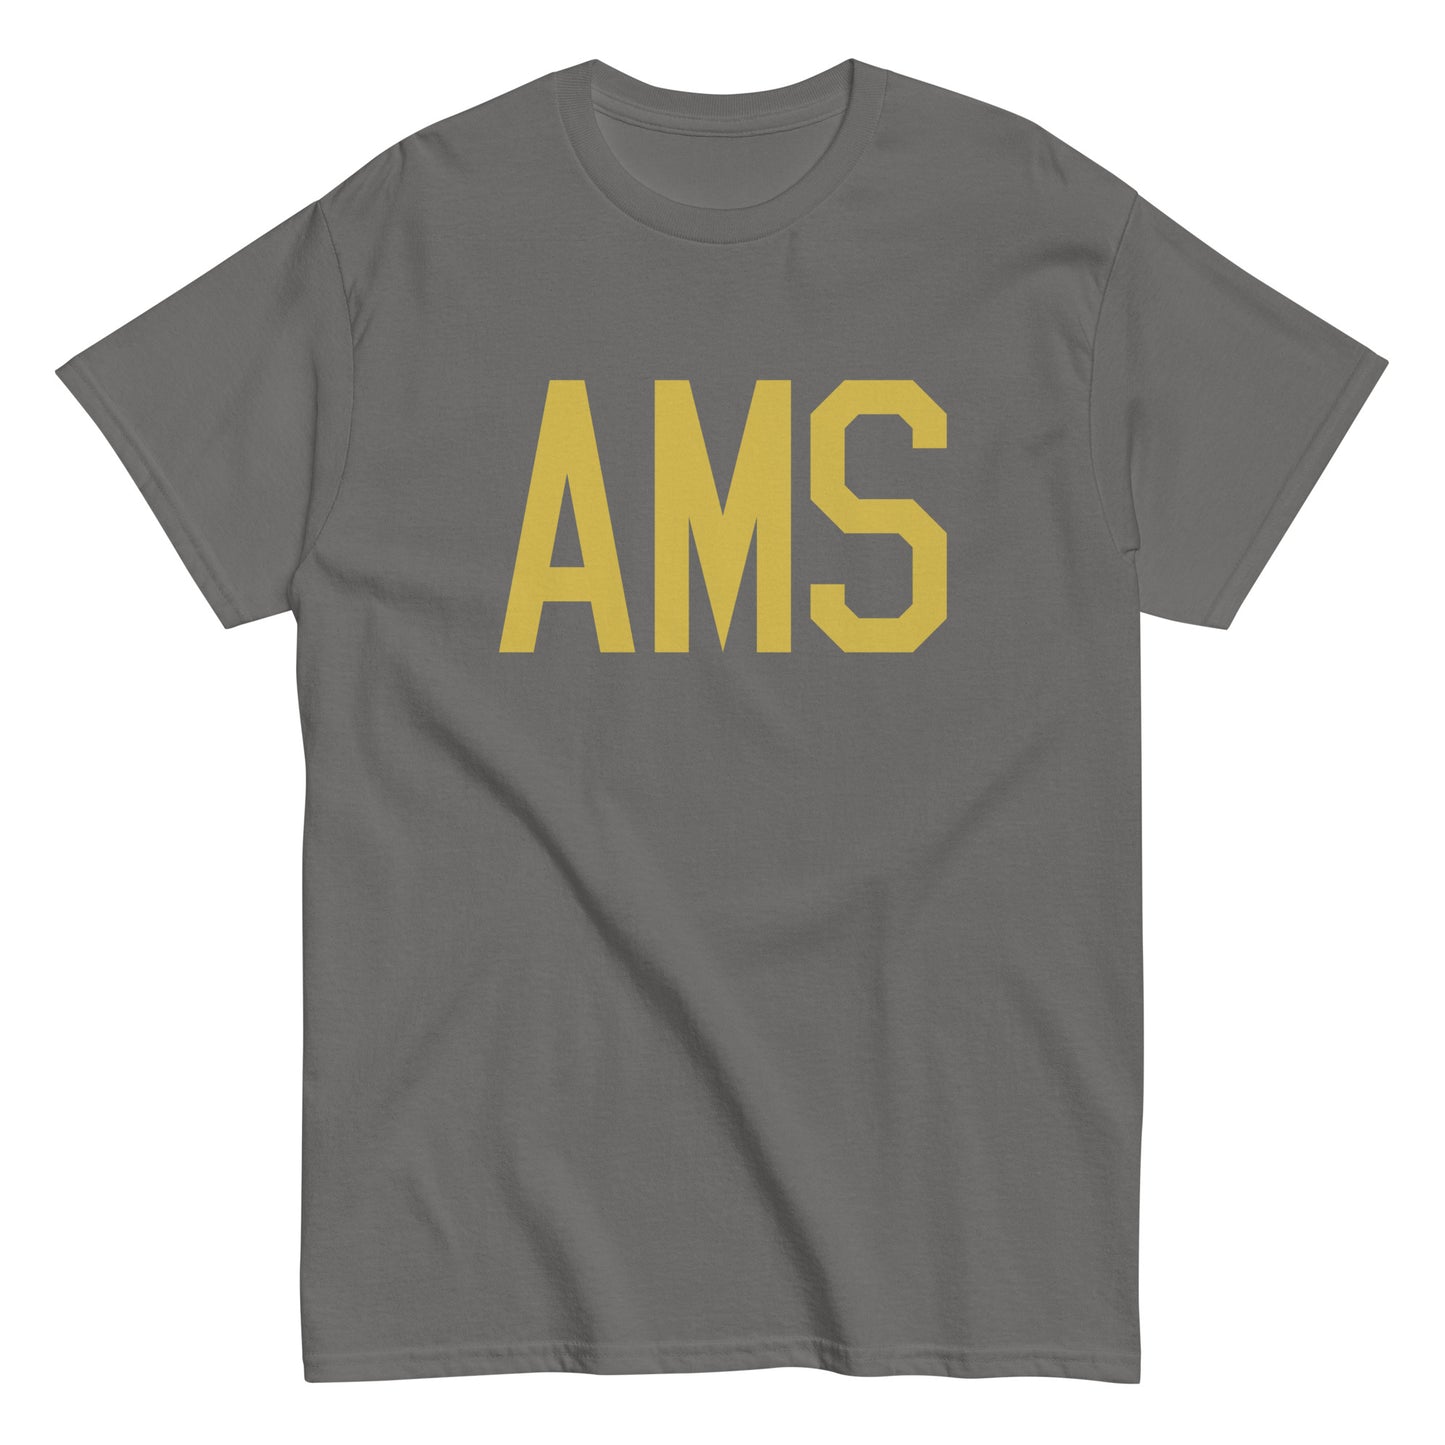 Aviation Enthusiast Men's Tee - Old Gold Graphic • AMS Amsterdam • YHM Designs - Image 01